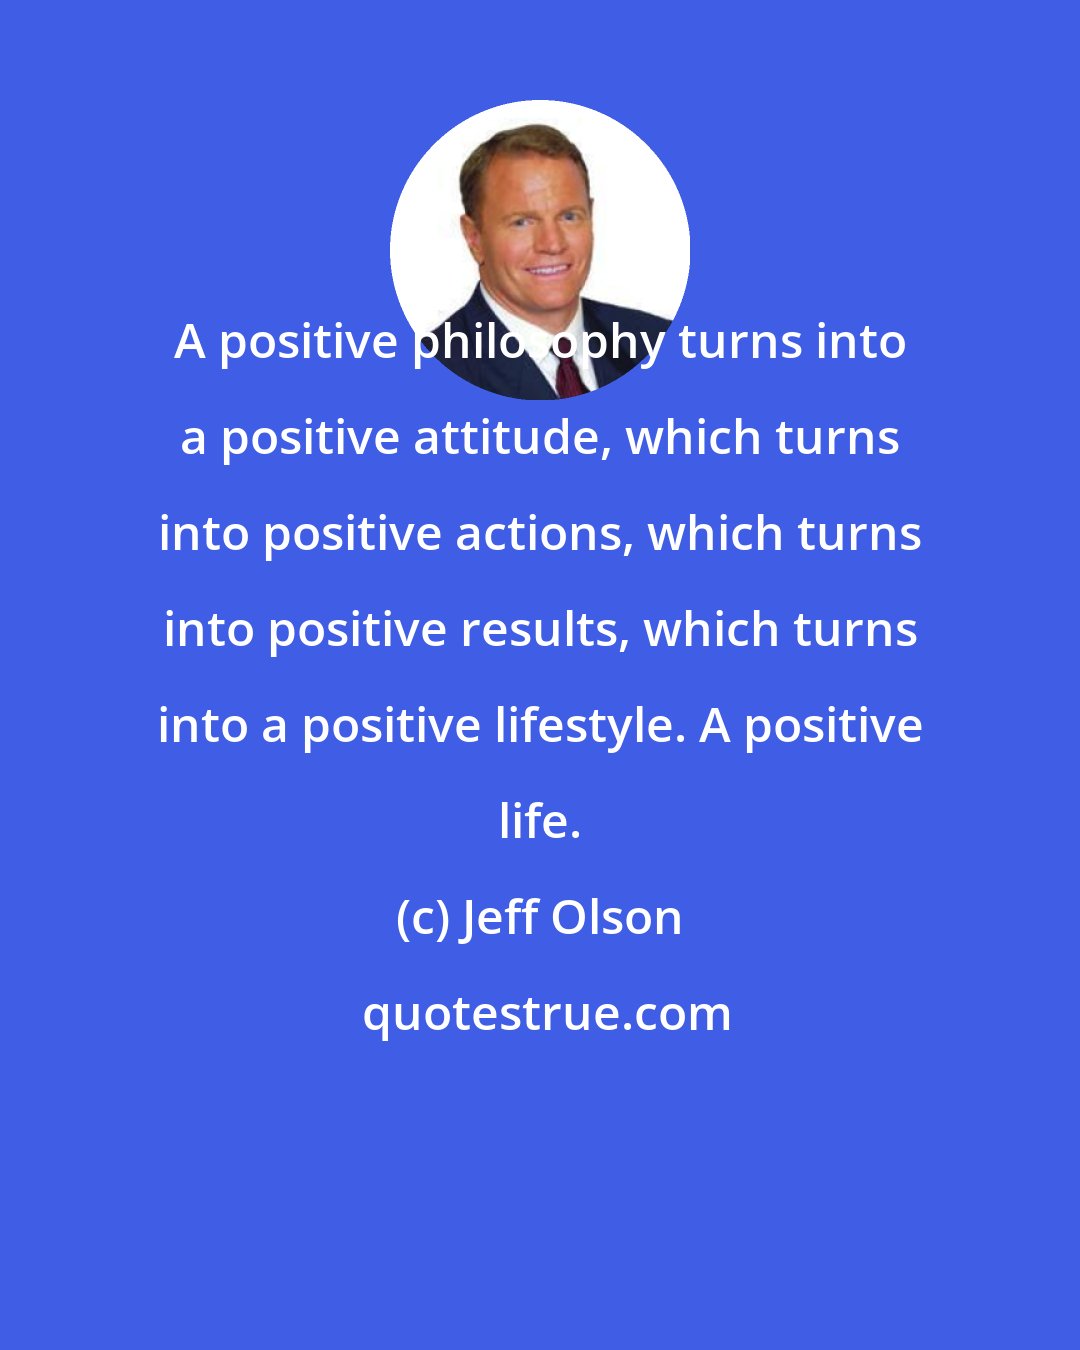 Jeff Olson: A positive philosophy turns into a positive attitude, which turns into positive actions, which turns into positive results, which turns into a positive lifestyle. A positive life.